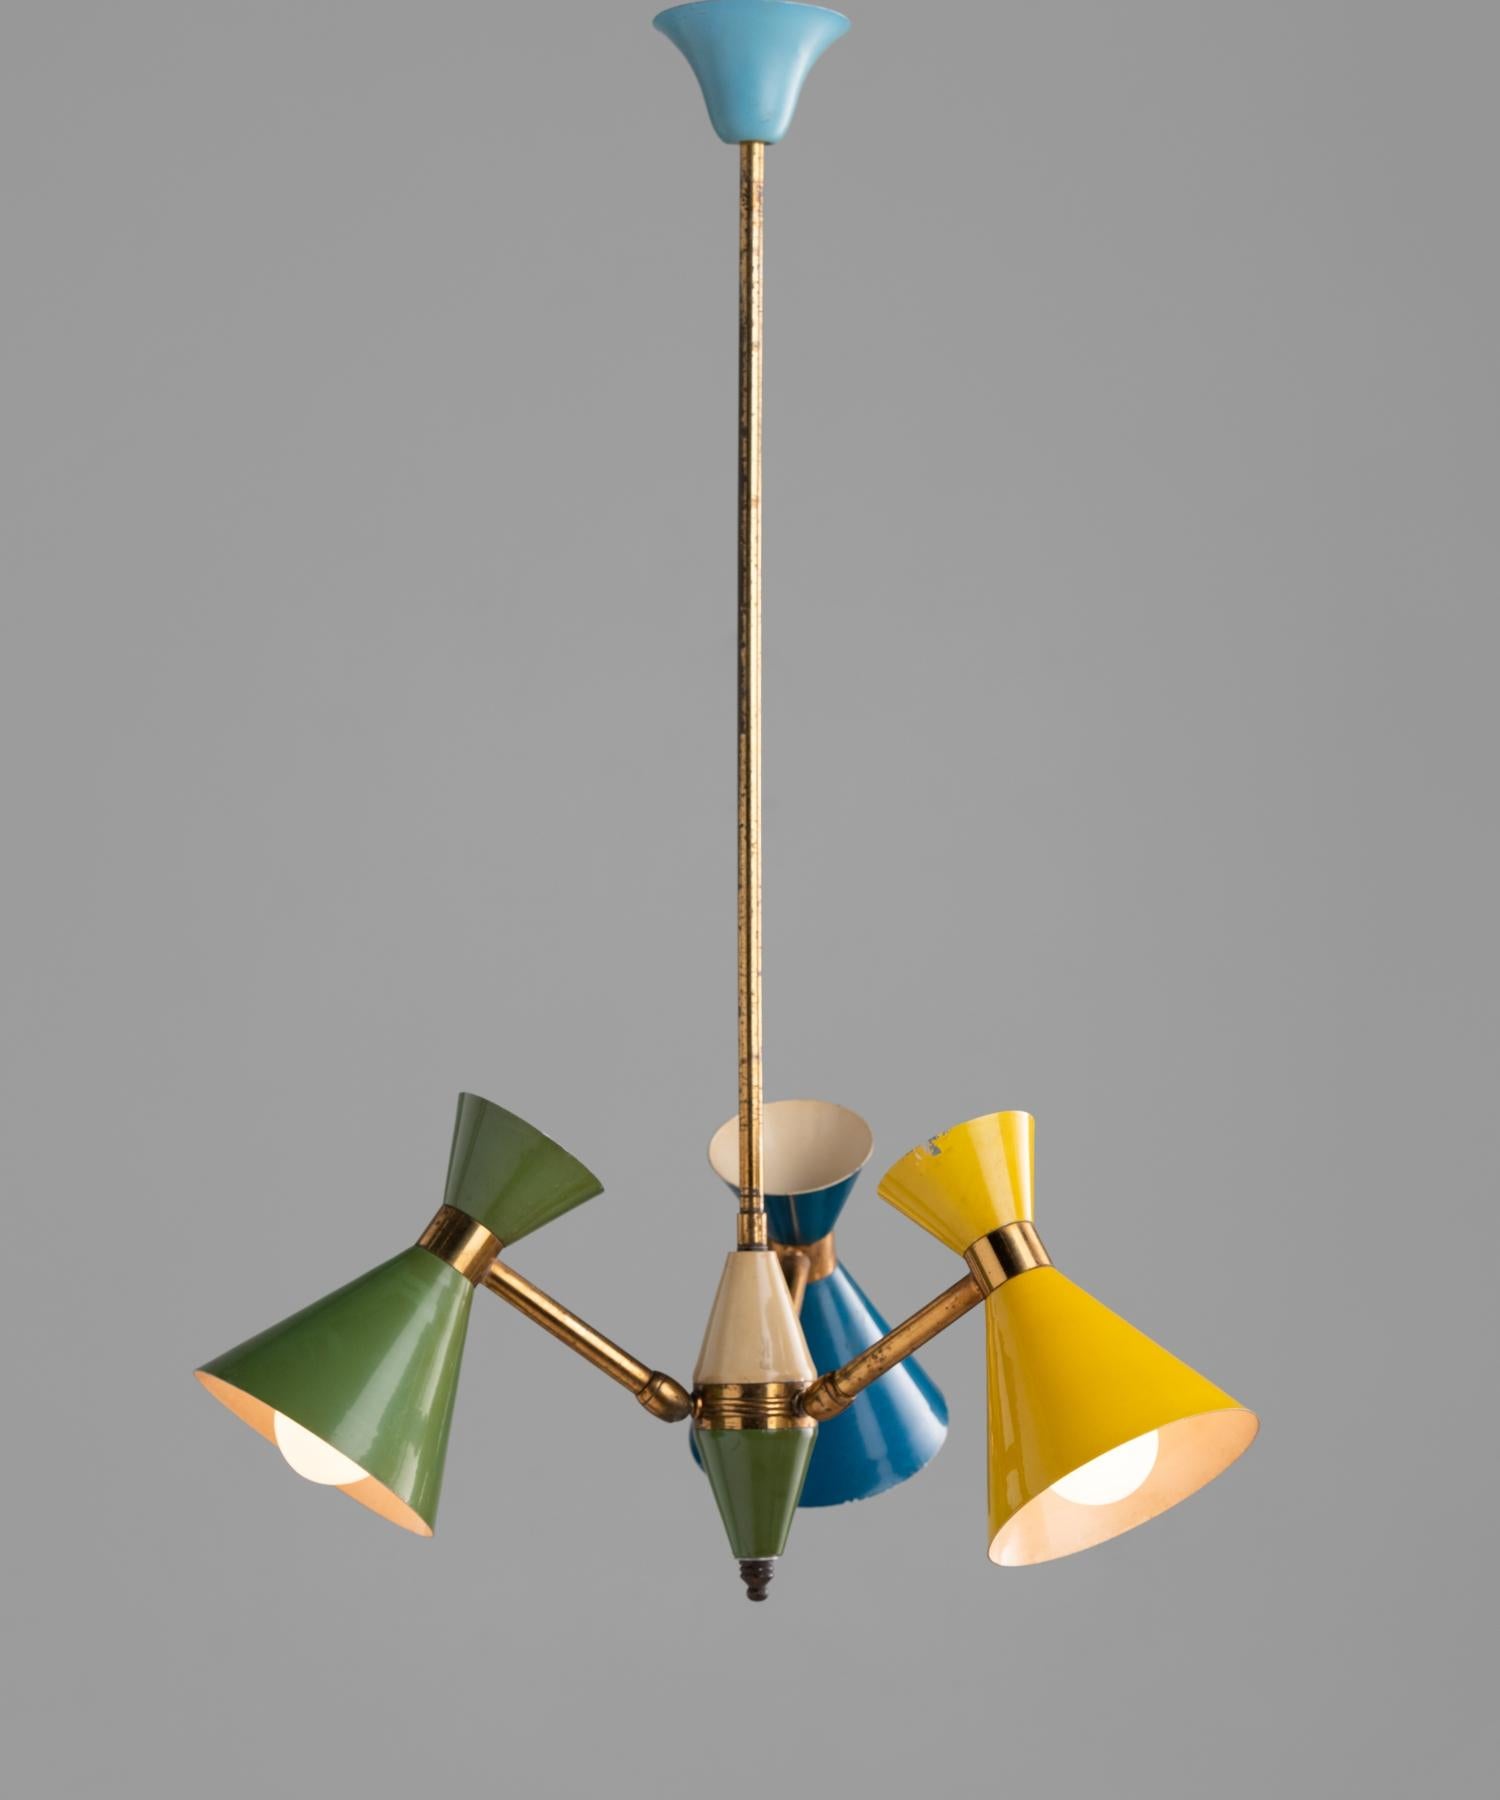 Petite multi-color chandelier, Italy, circa 1960.

Small-scaled form with original, playfully colored painted elements, which include pivoting shades.